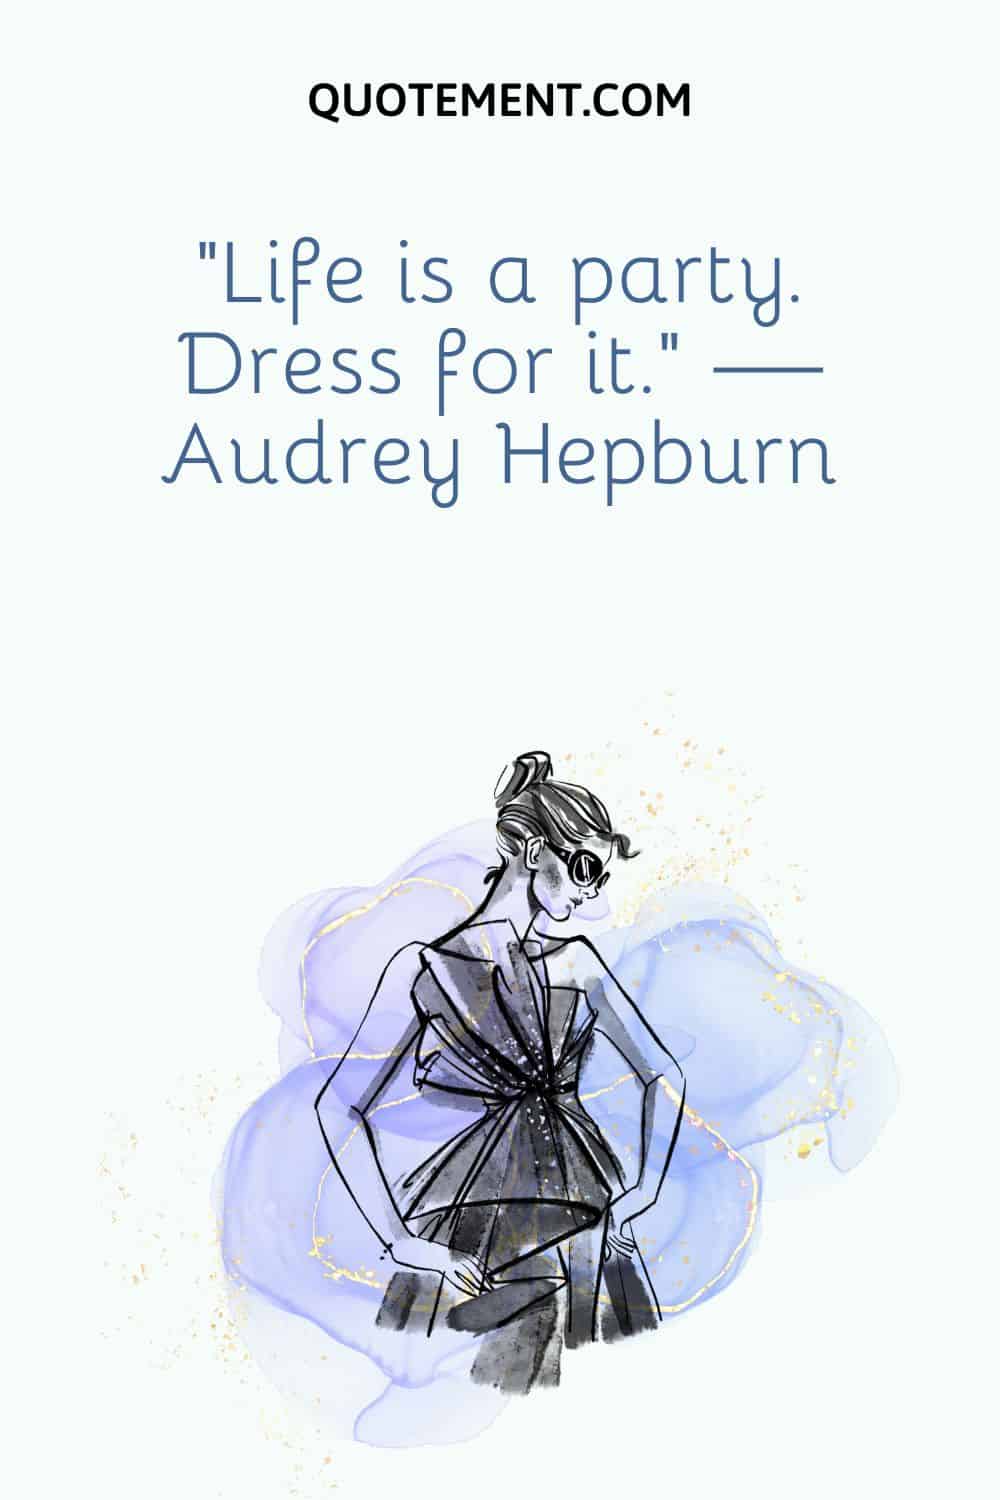 Life is a party. Dress for it.